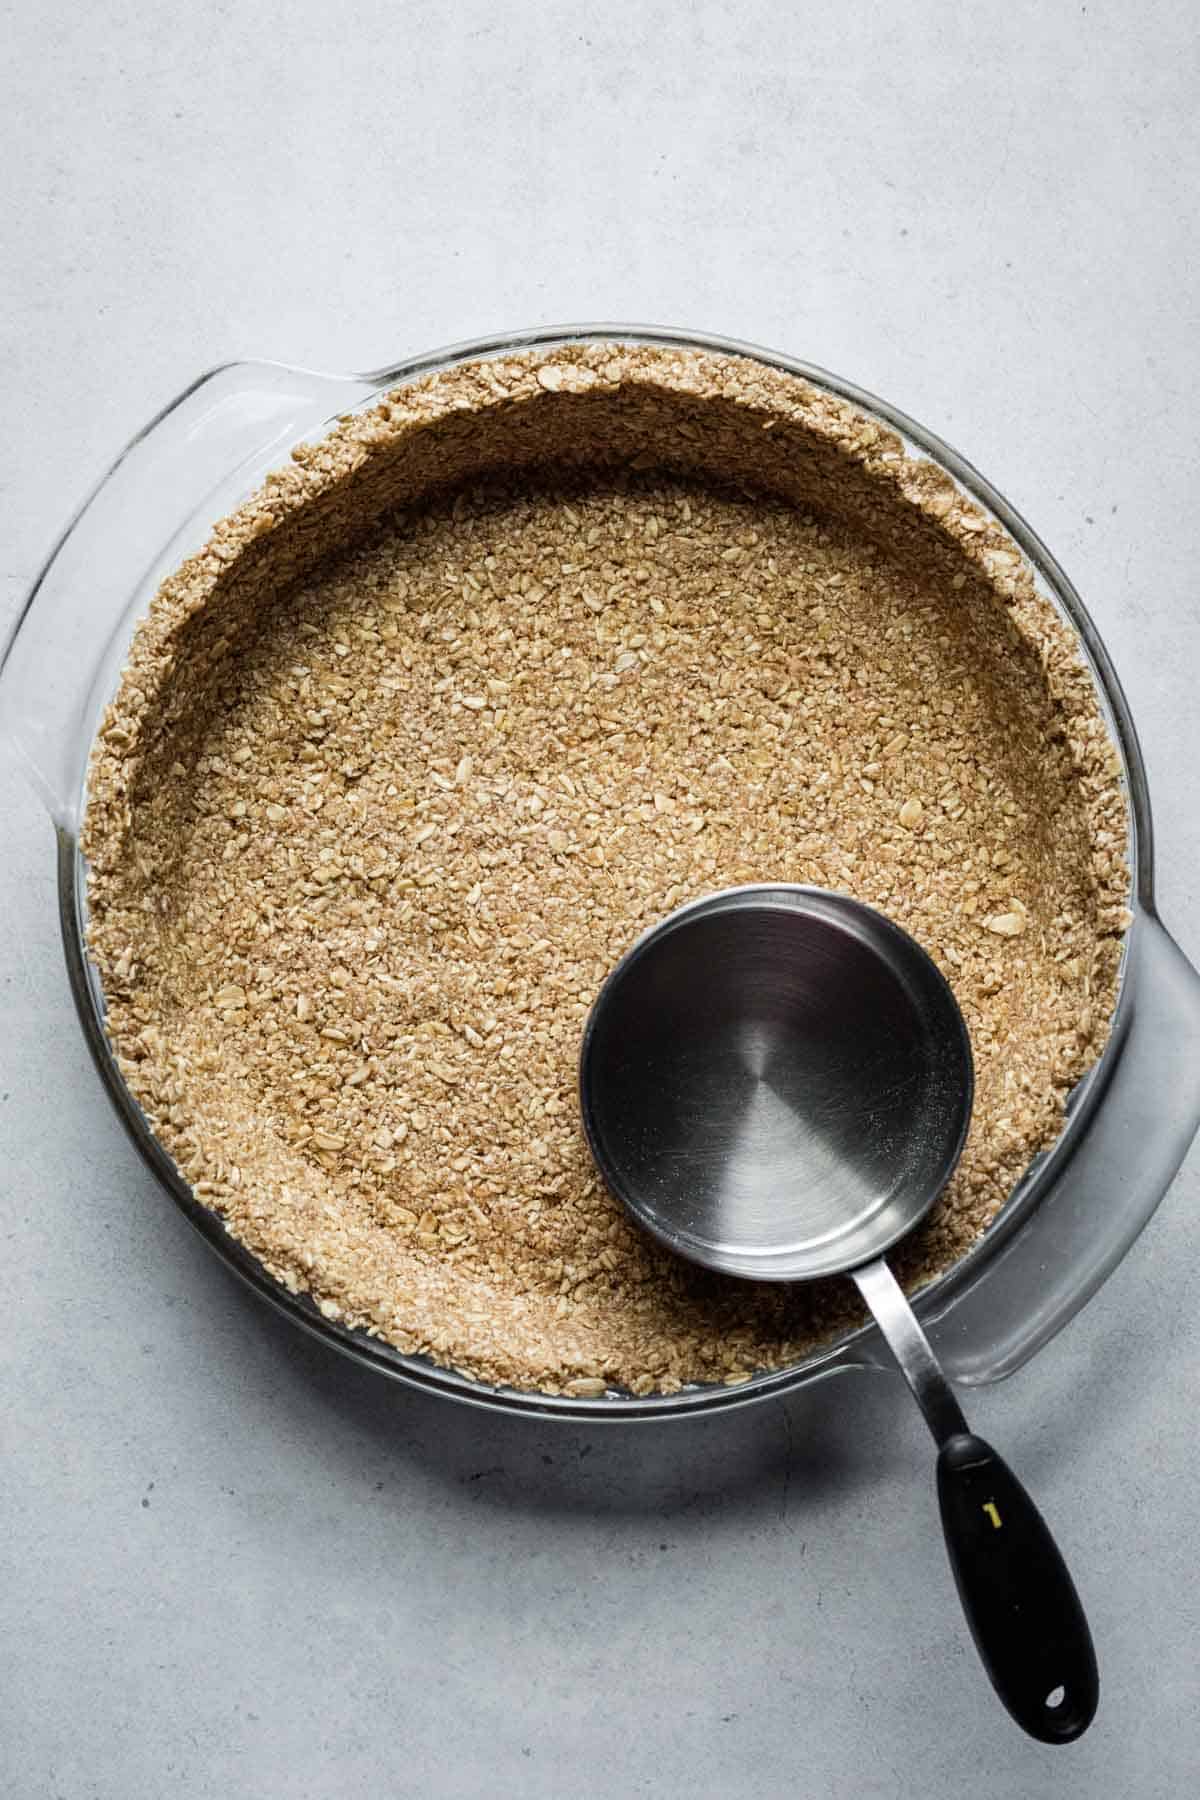 Using the bottom of a measuring cup to press the oat pie crust into the dish.